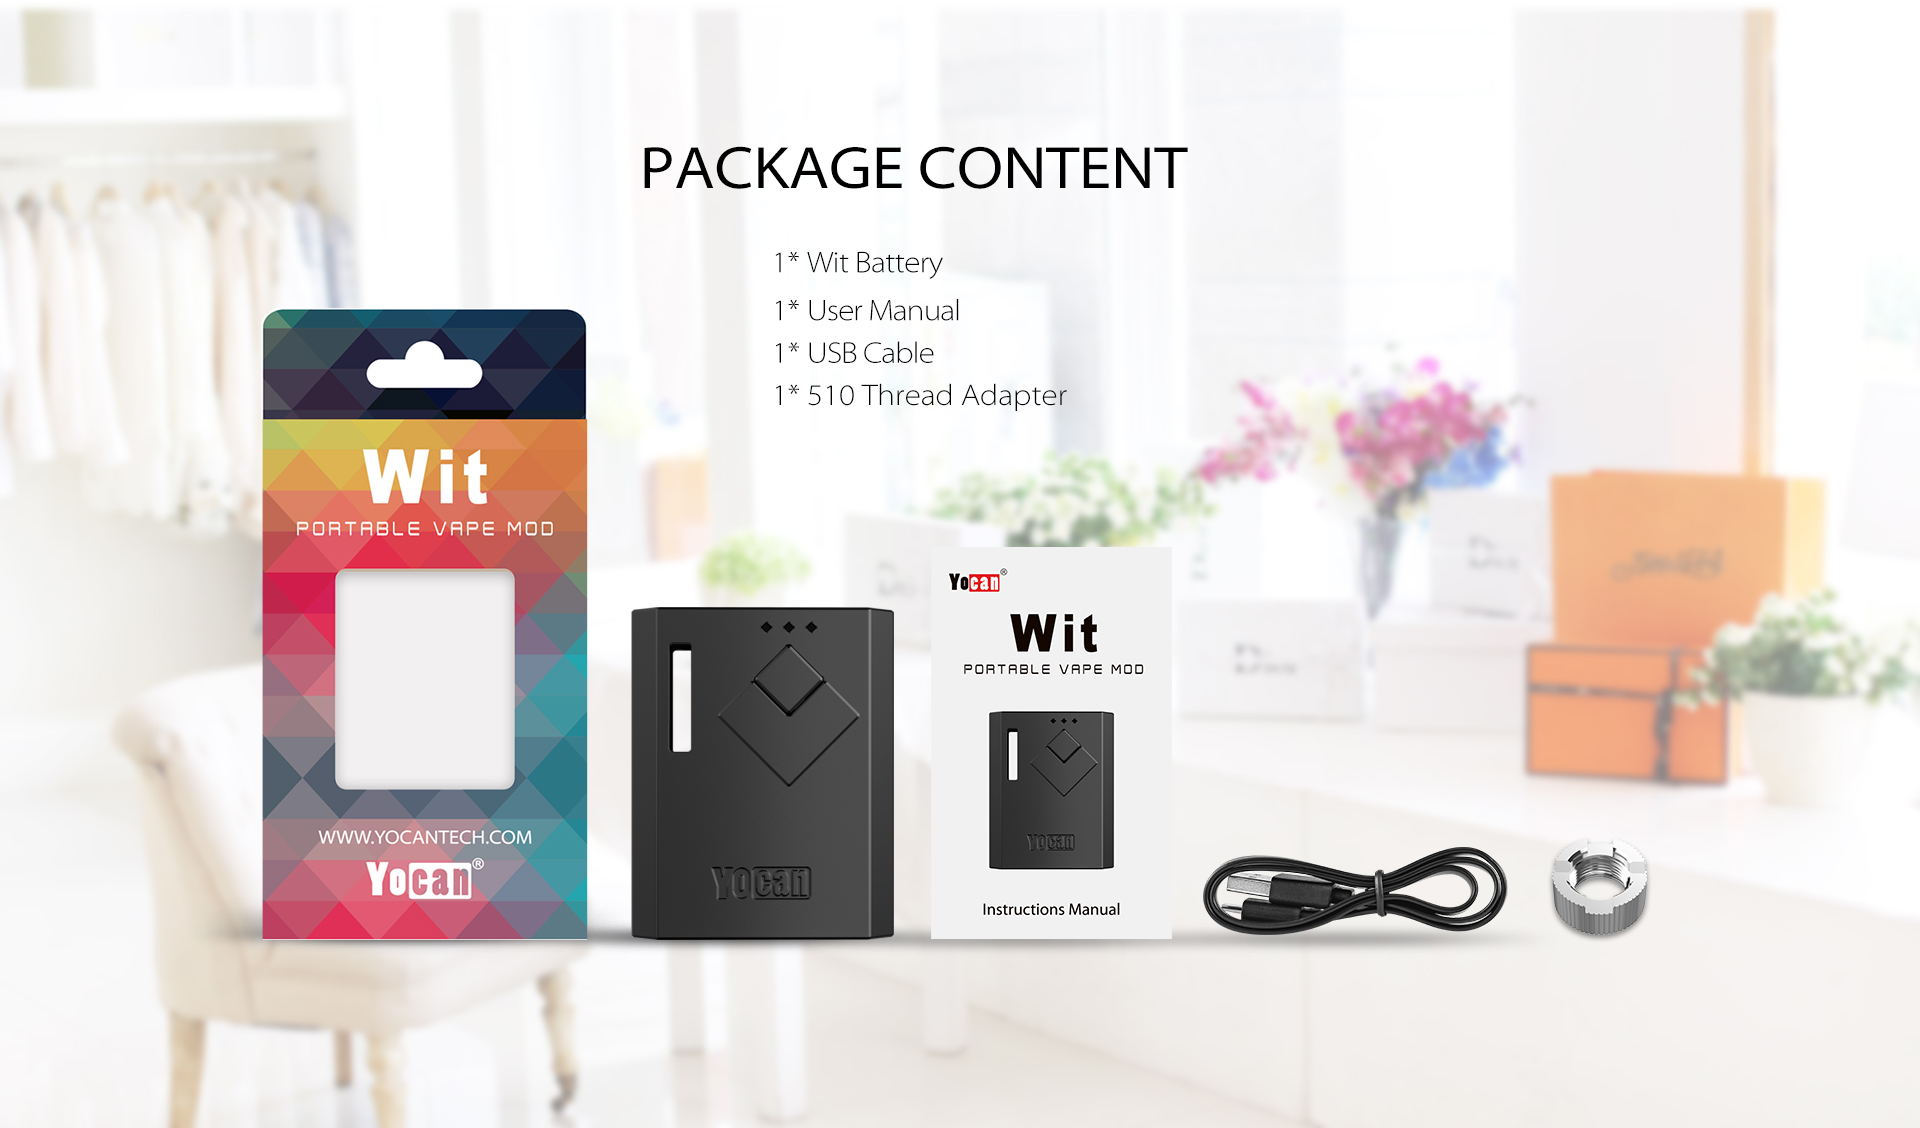 The Yocan Wit Box Mod Battery package content.